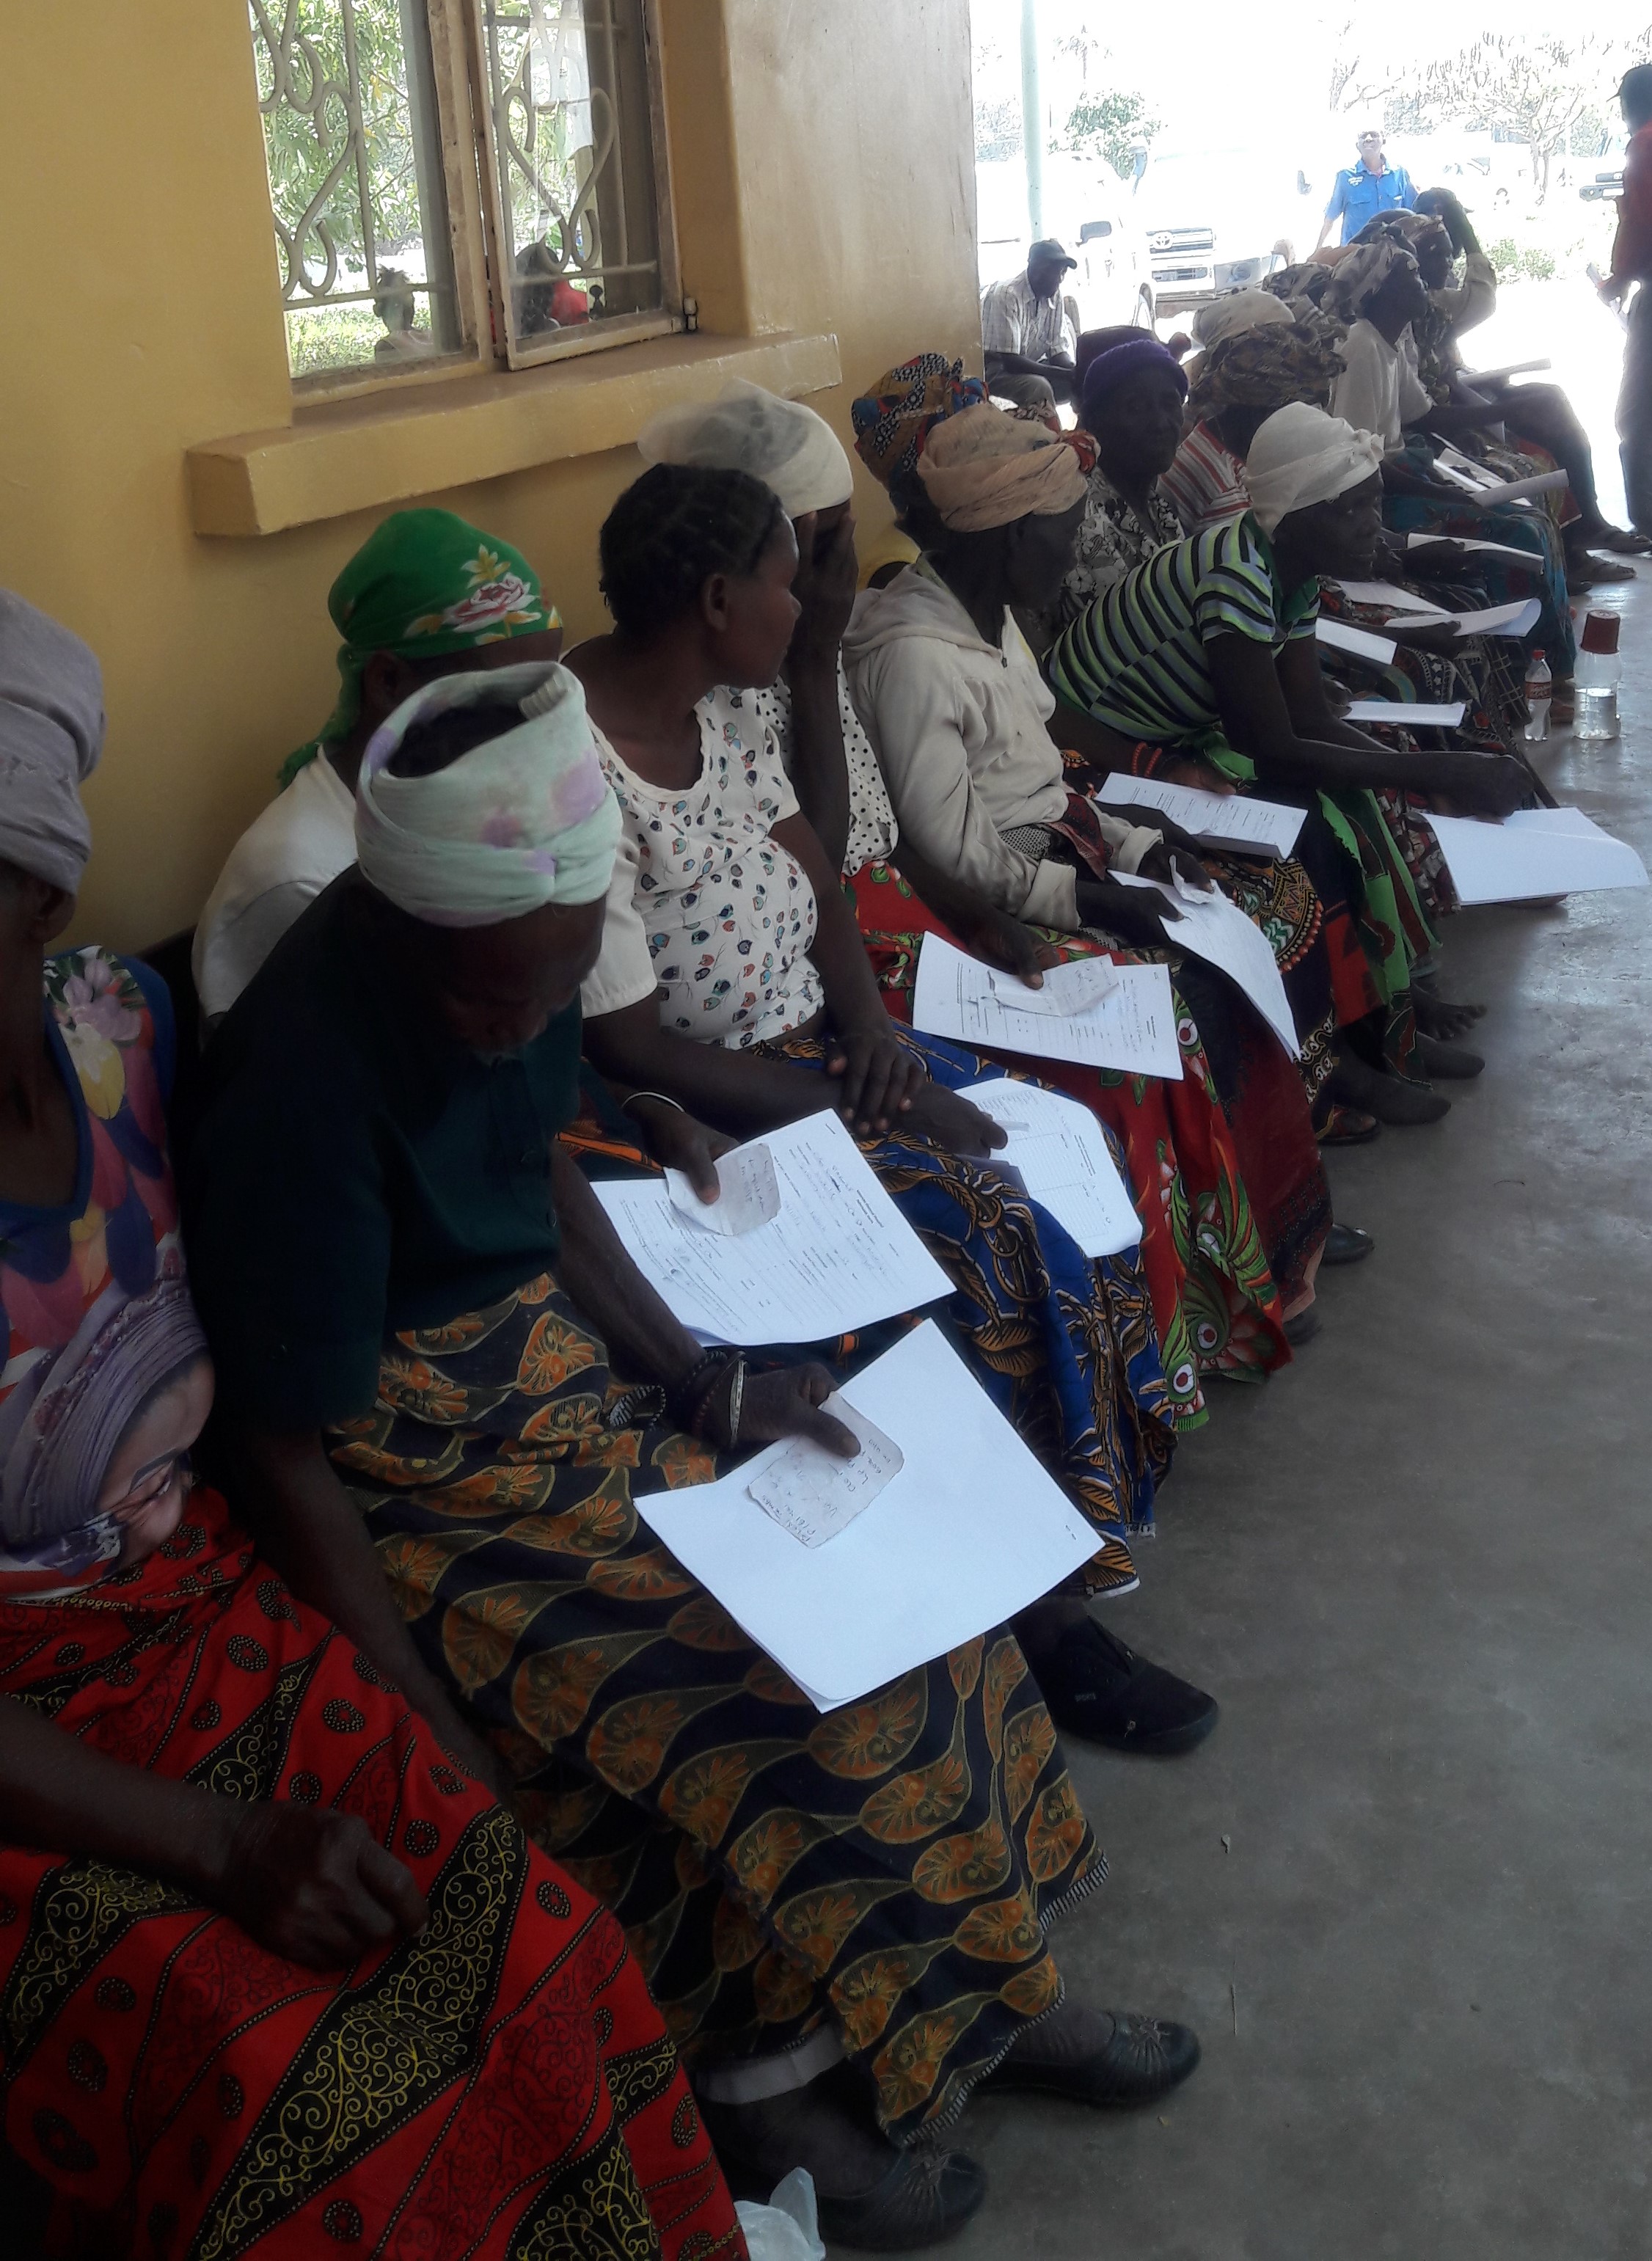 Women in Zambia lining up to have their eyes screened at an Operation Eyesight screening and outreach program.